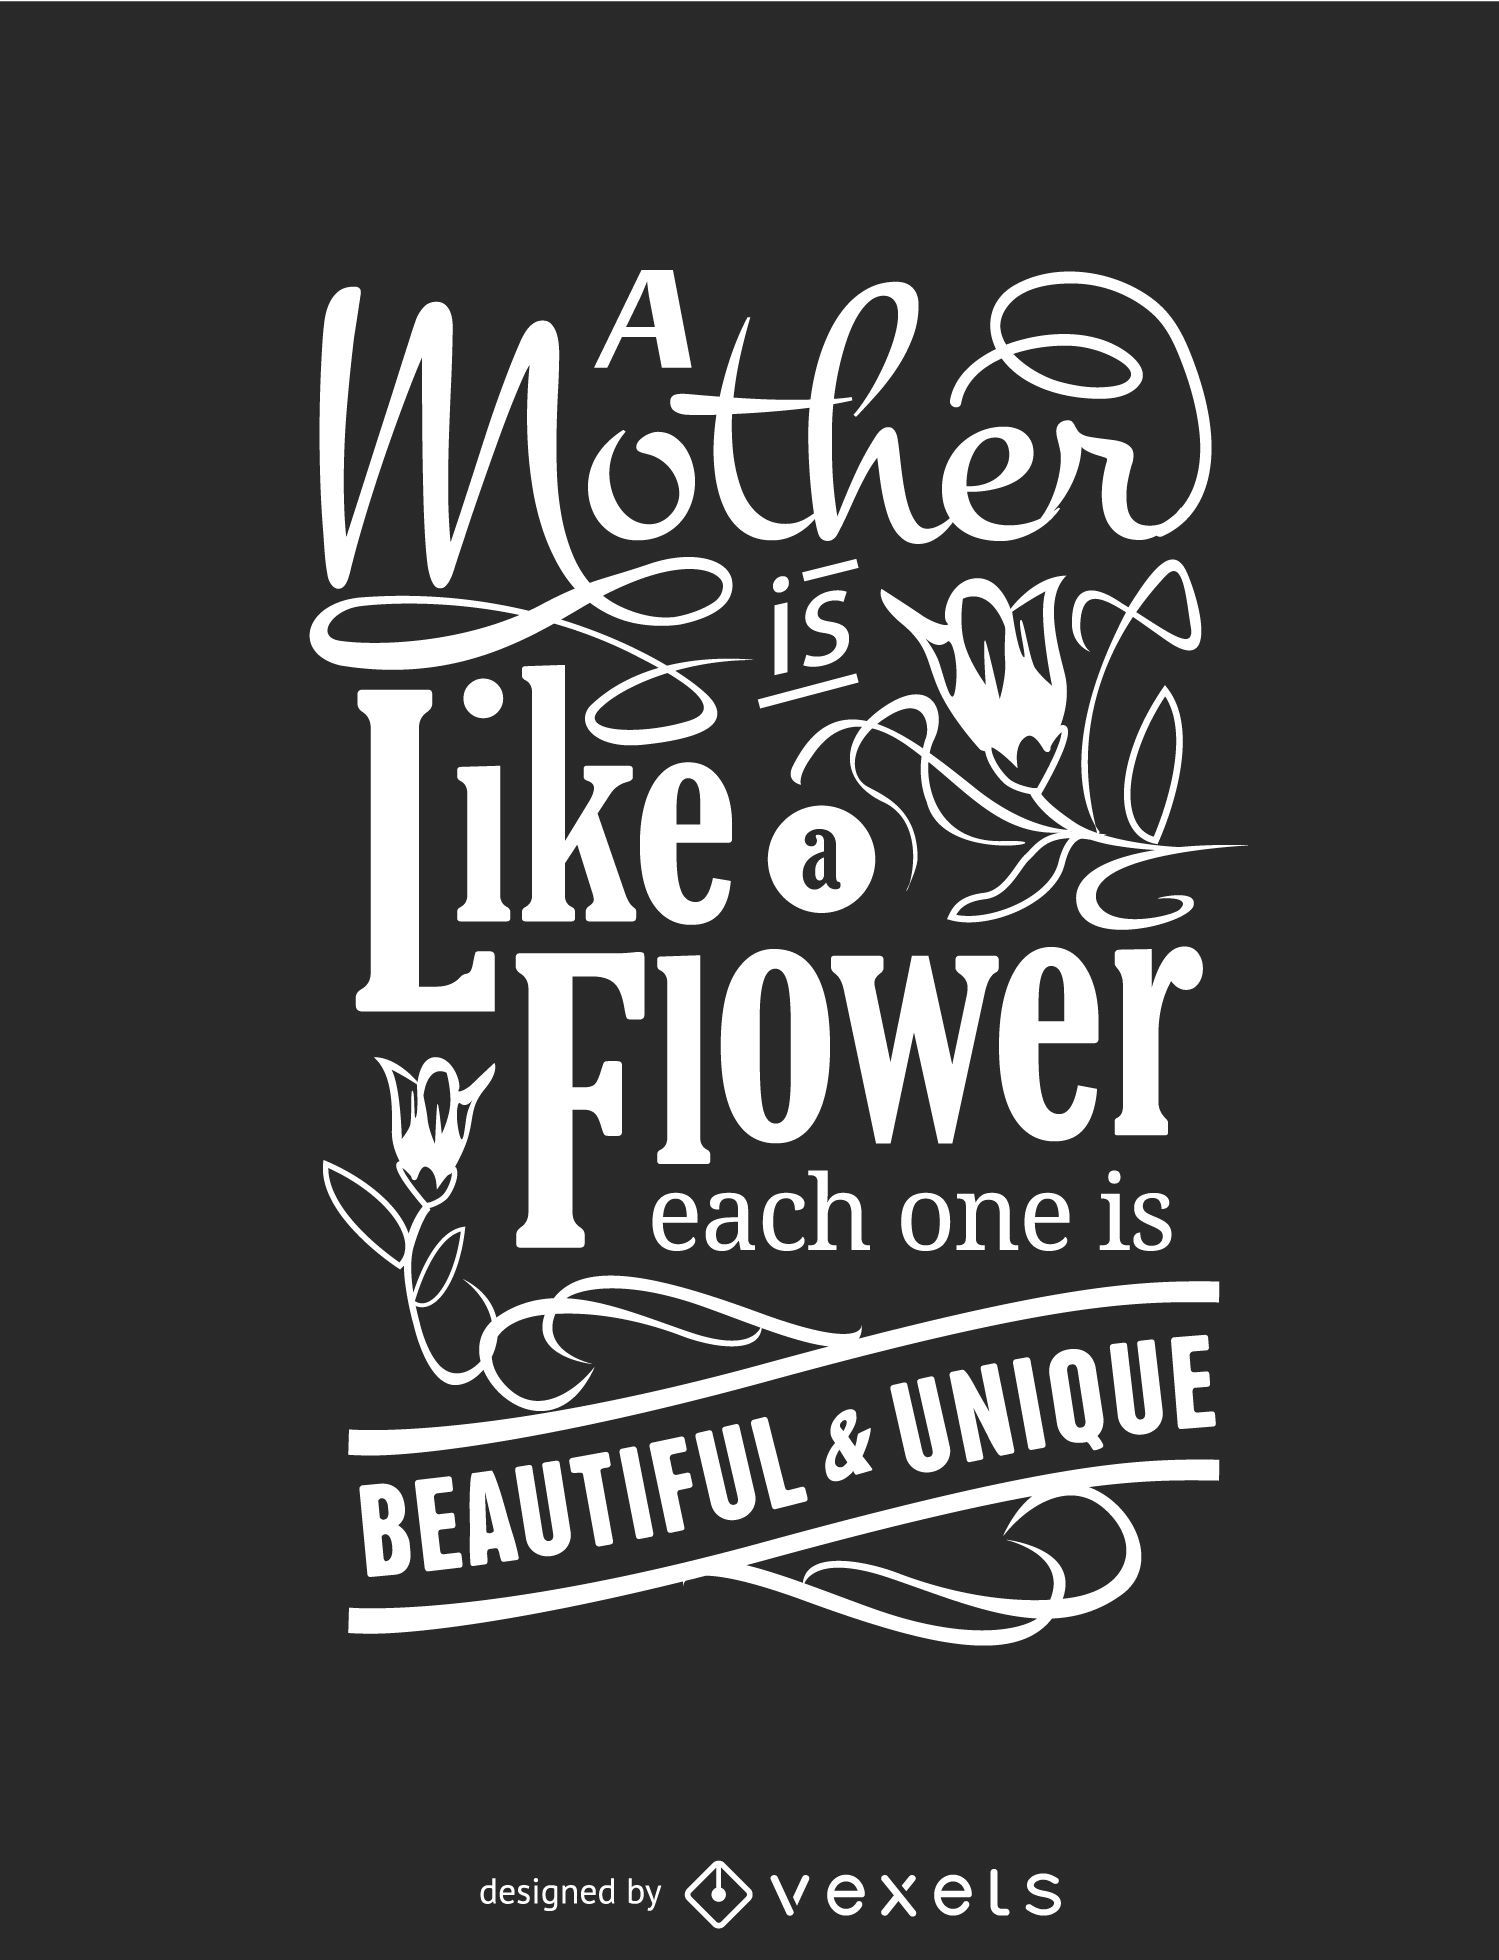 Mother's Day typographic poster - Vector download